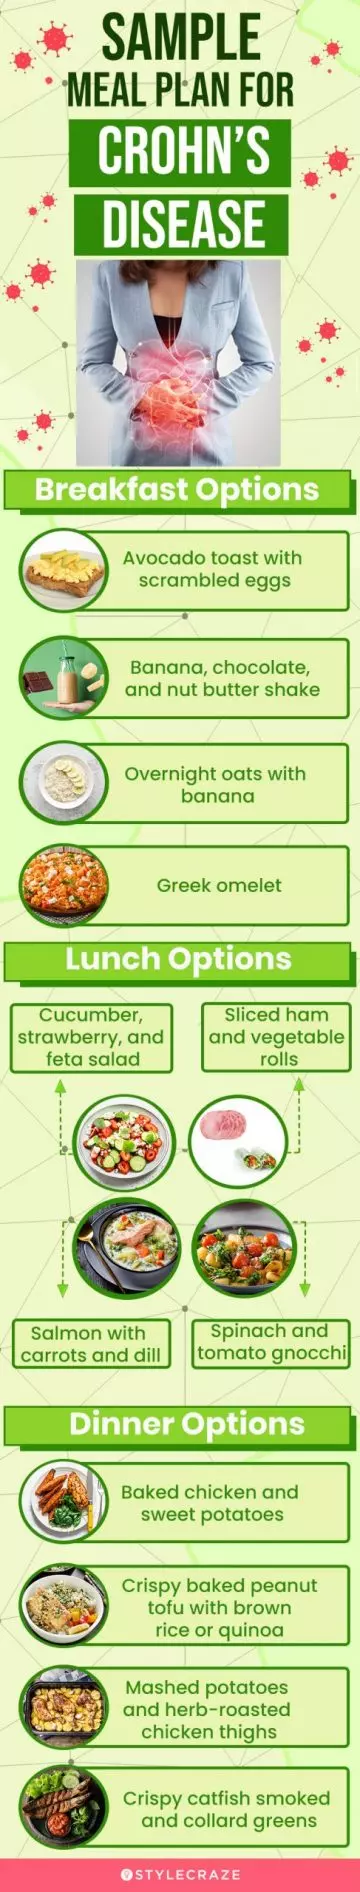 sample meal plan for crohns disease (infographic)